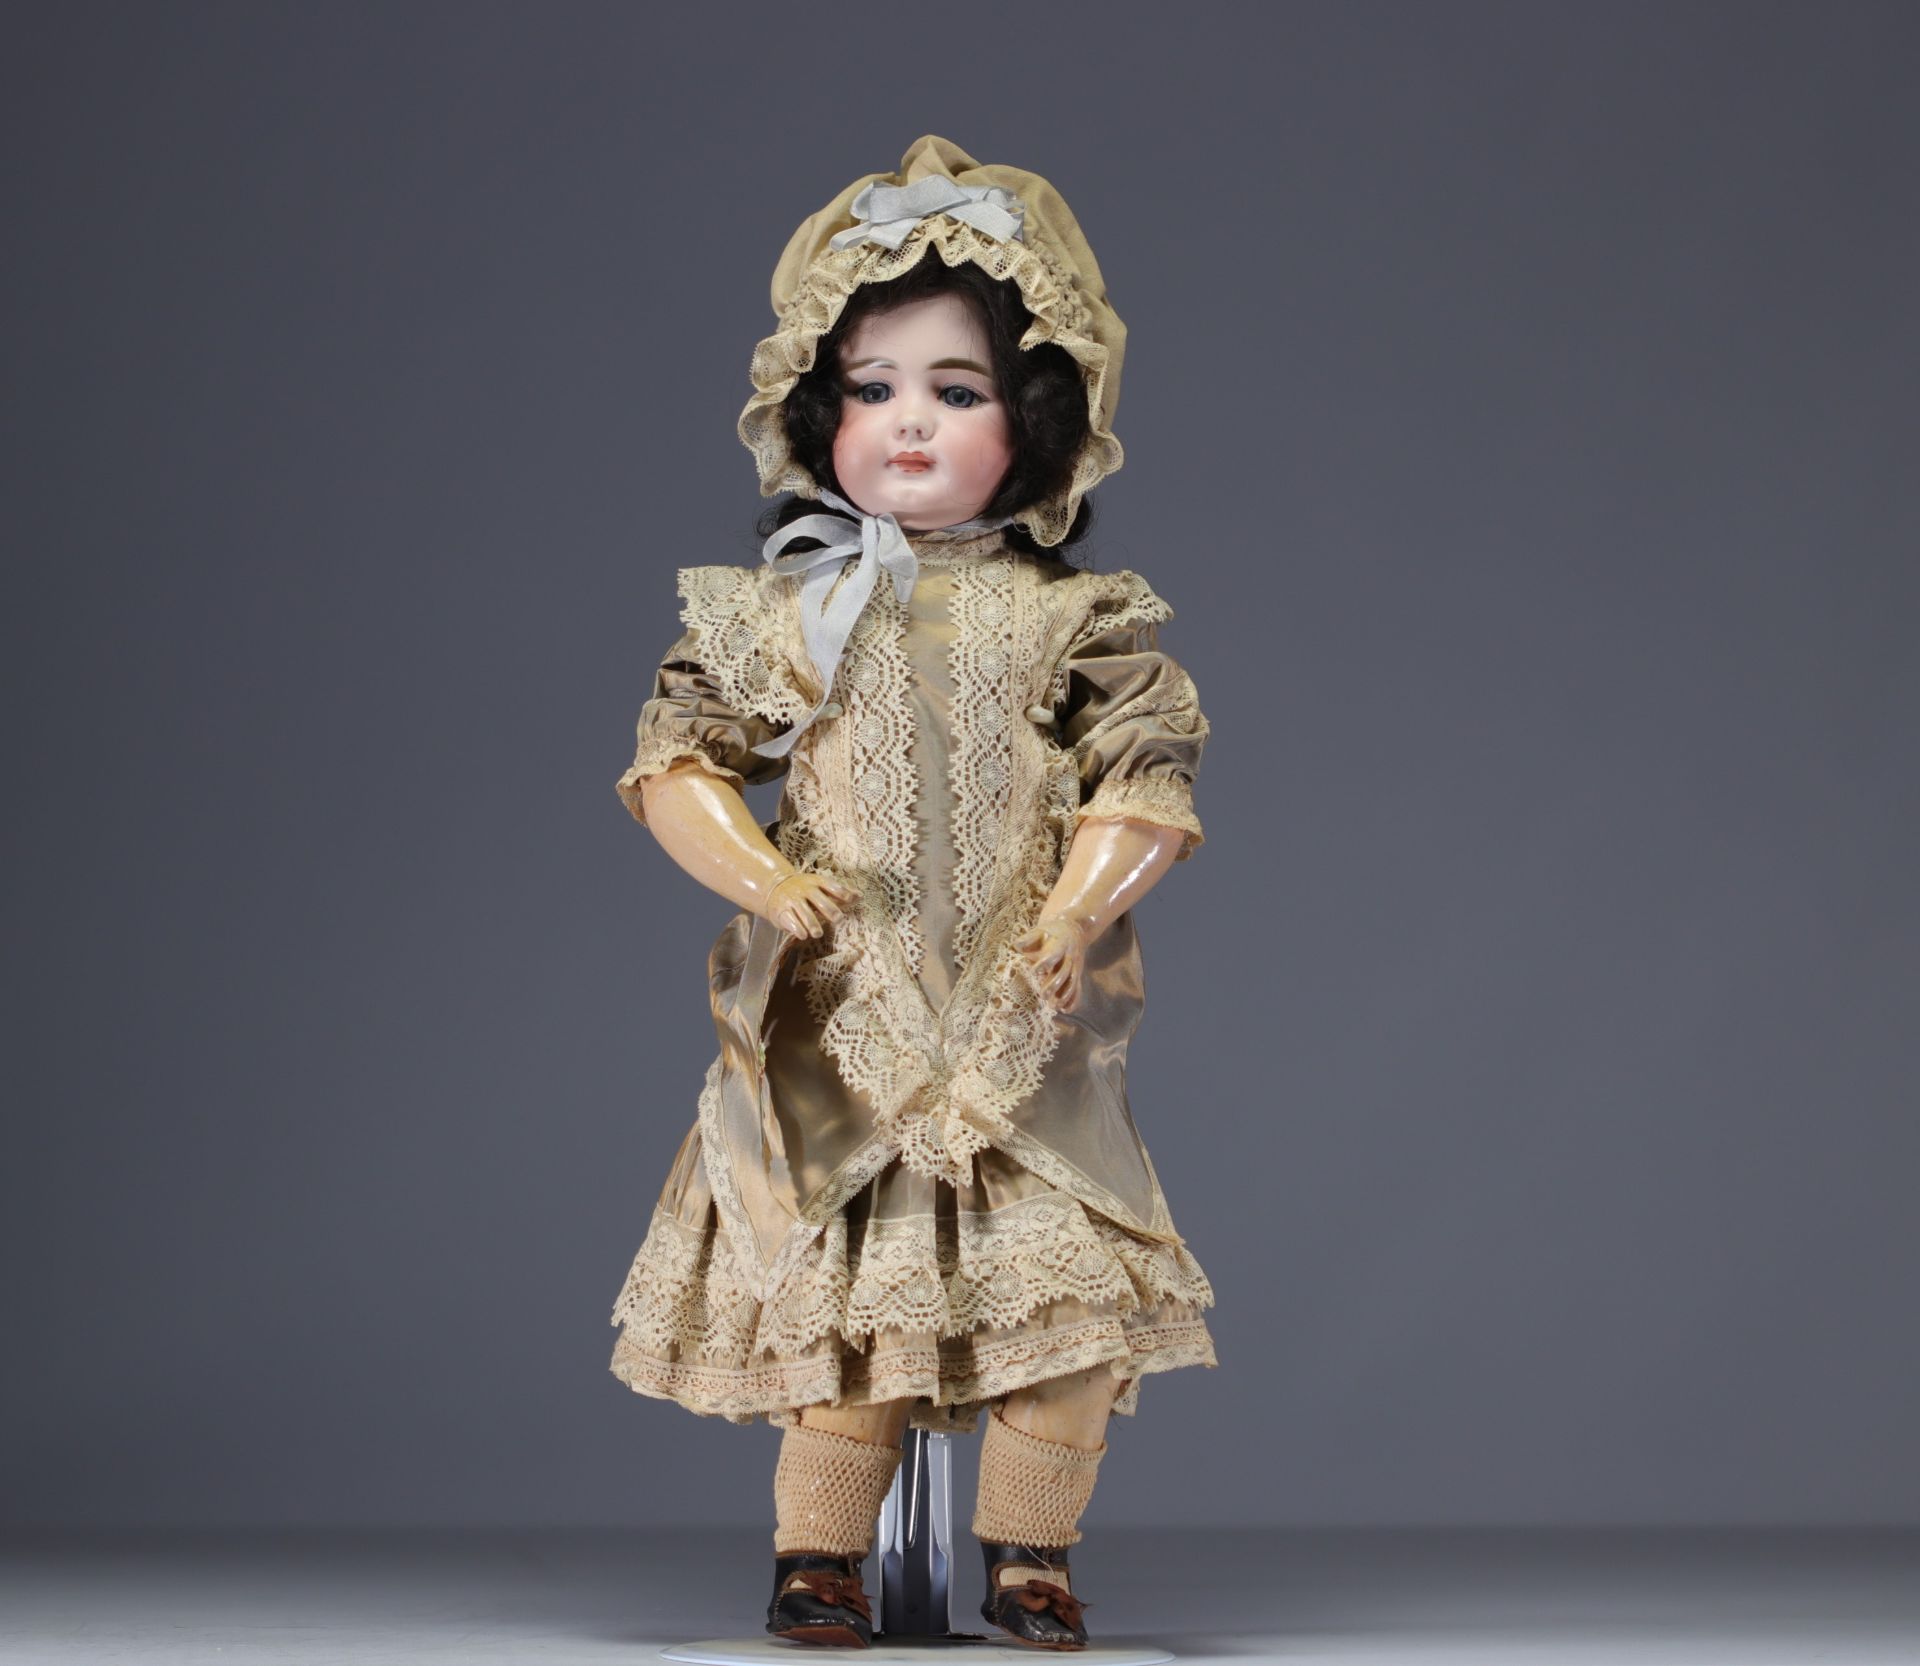 SIMON & HALBIG - Bisque head doll no. 719, debossed, mouth closed. - Image 2 of 2